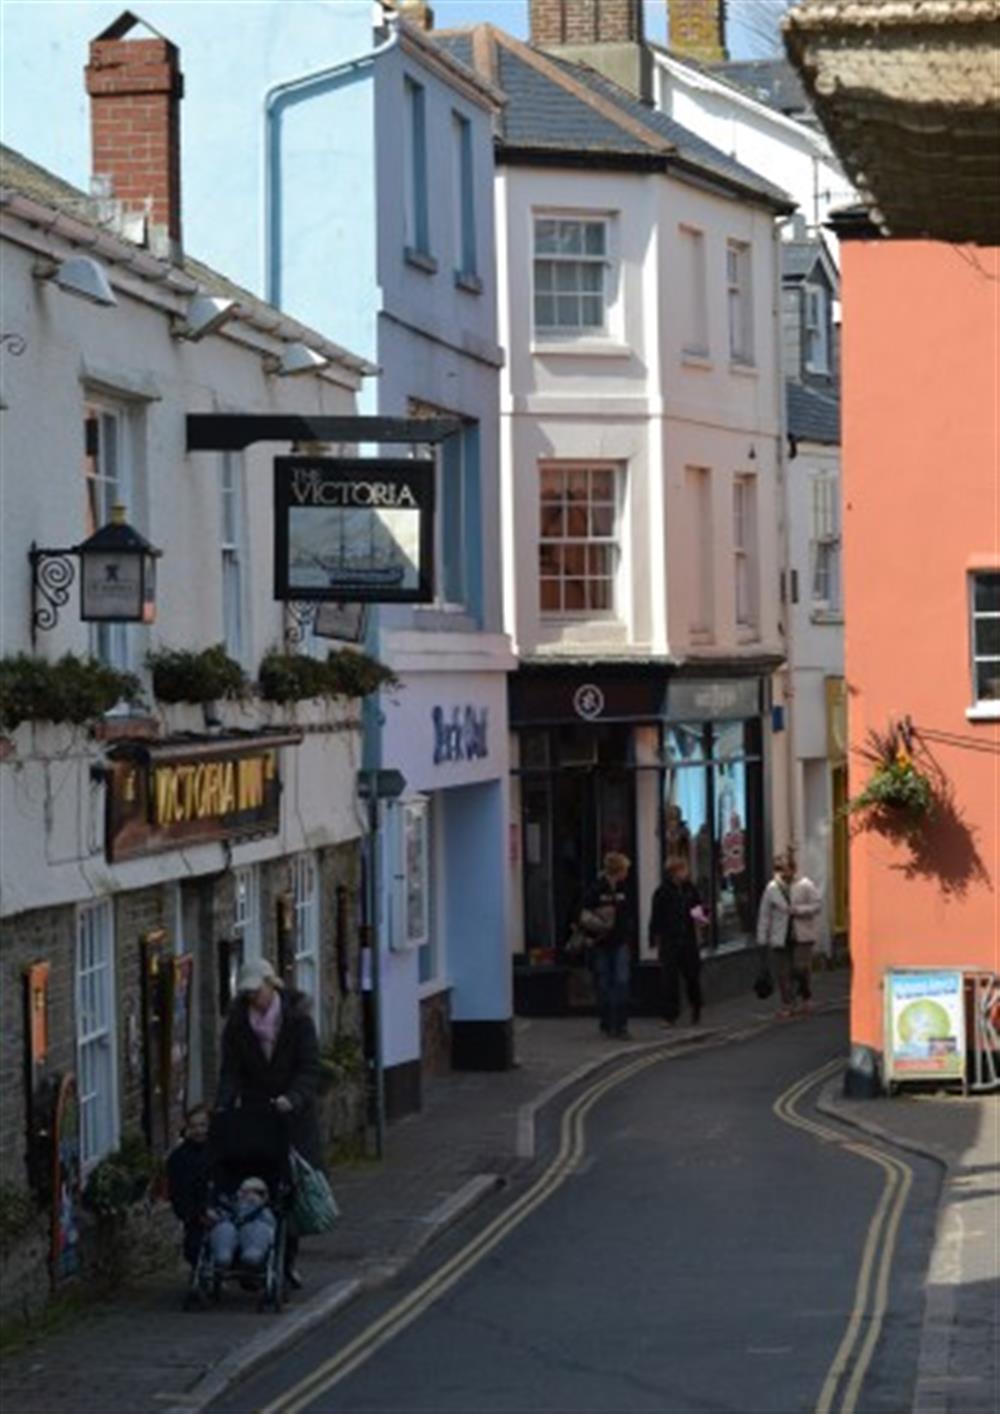 Great pubs and restaurants all within easy walking distance at Seahorse Cottage (30 Fore Street) in Salcombe